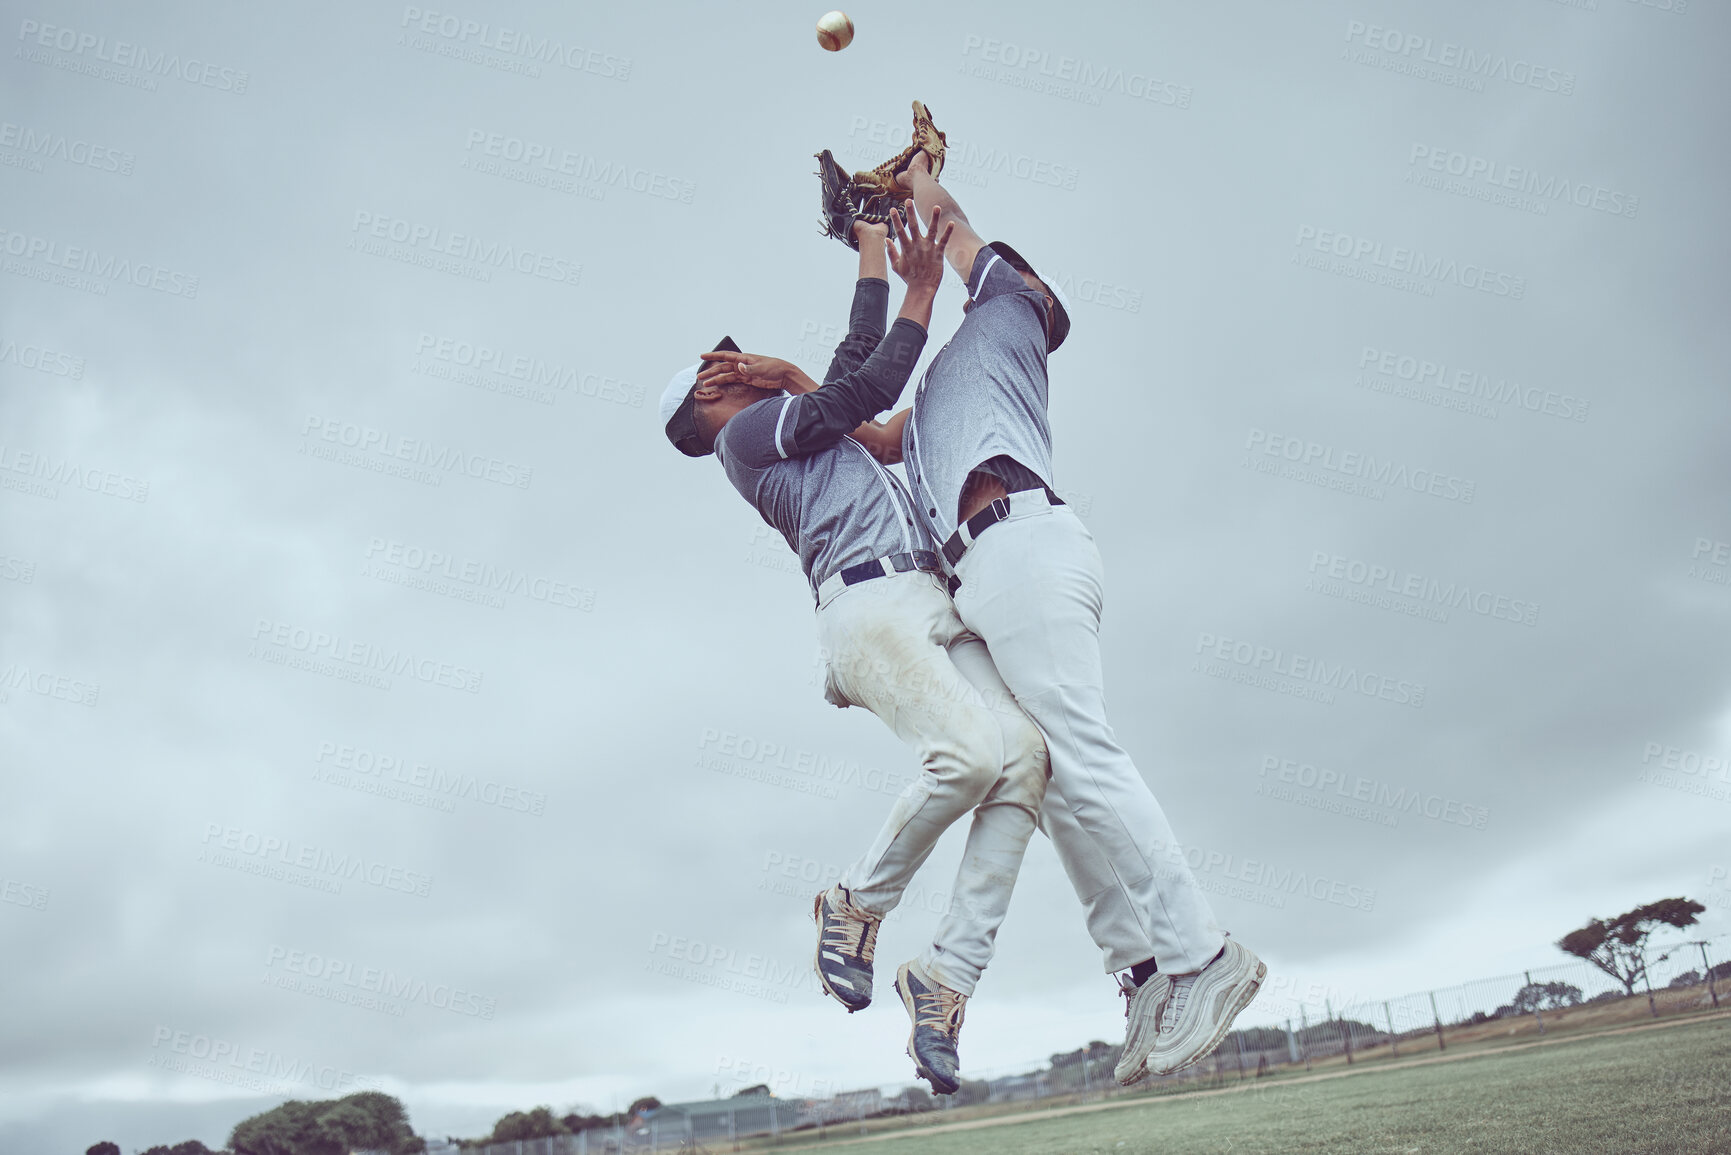 Buy stock photo Sports, action and a men catch baseball, jump in air with ball in baseball glove. Energy, sport and catch, baseball player on the field or pitch during game, professional athlete in game or match